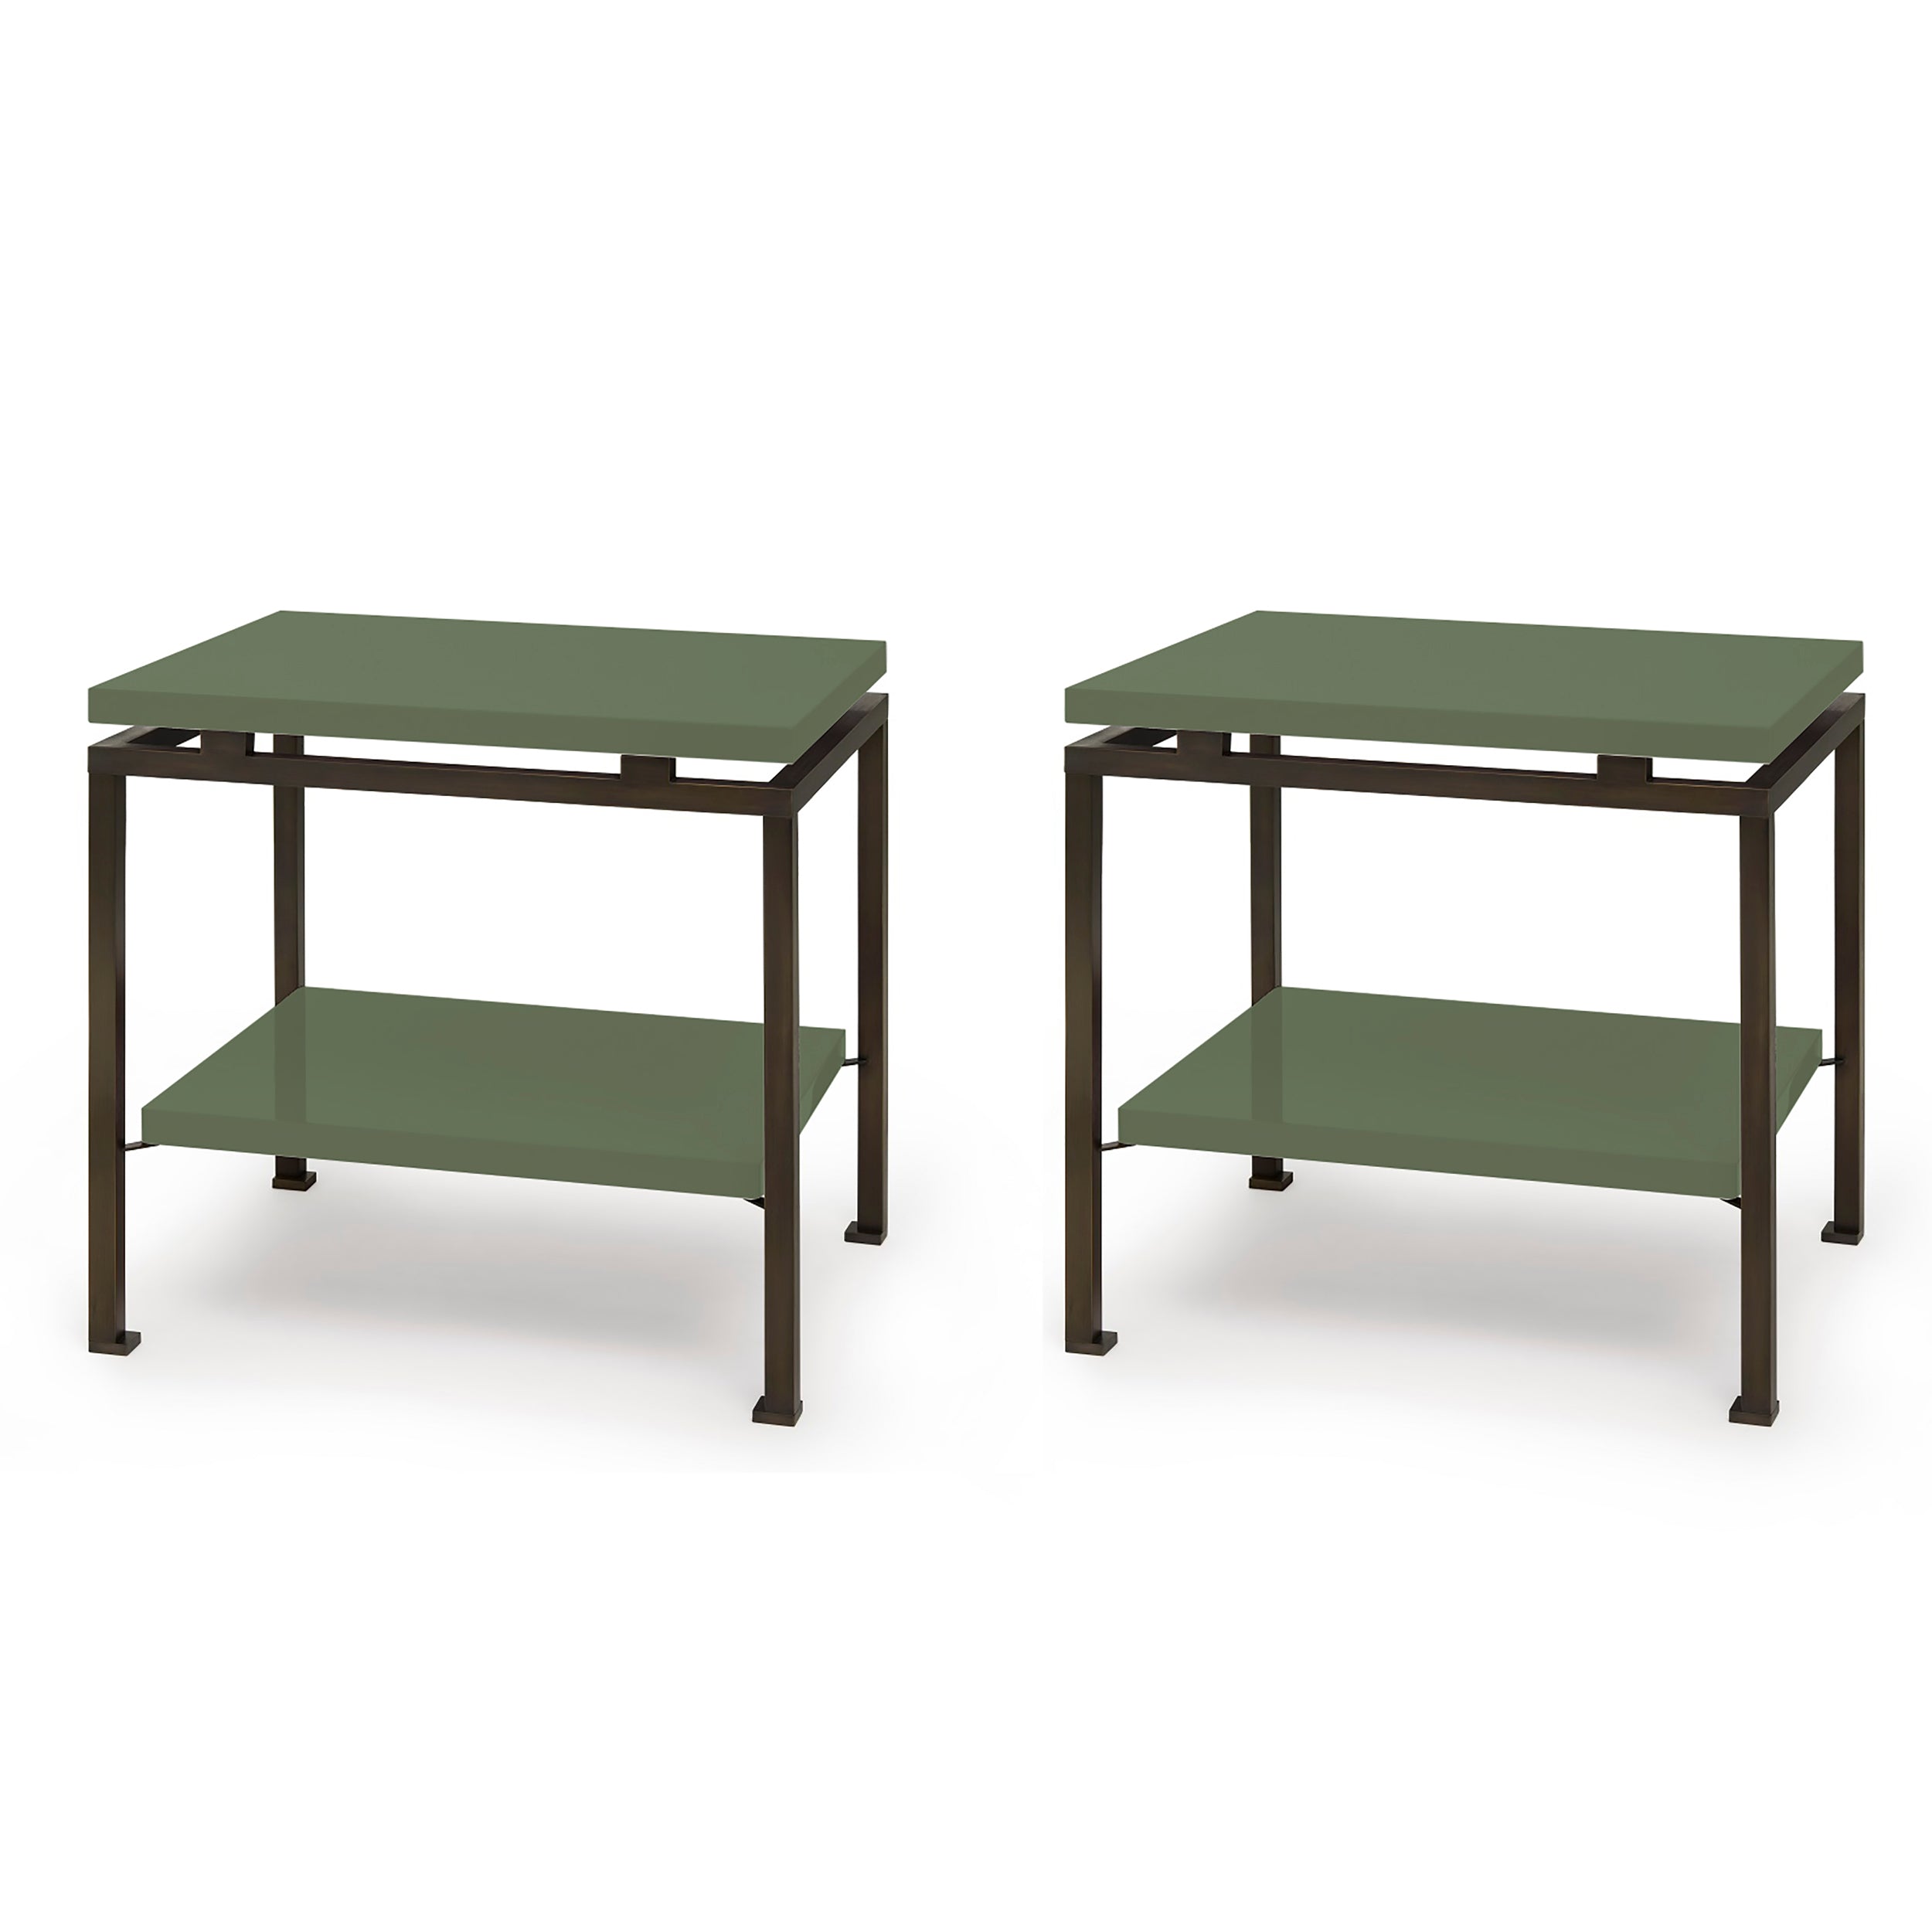 Portsea Side Table in Calke Green and Bronze